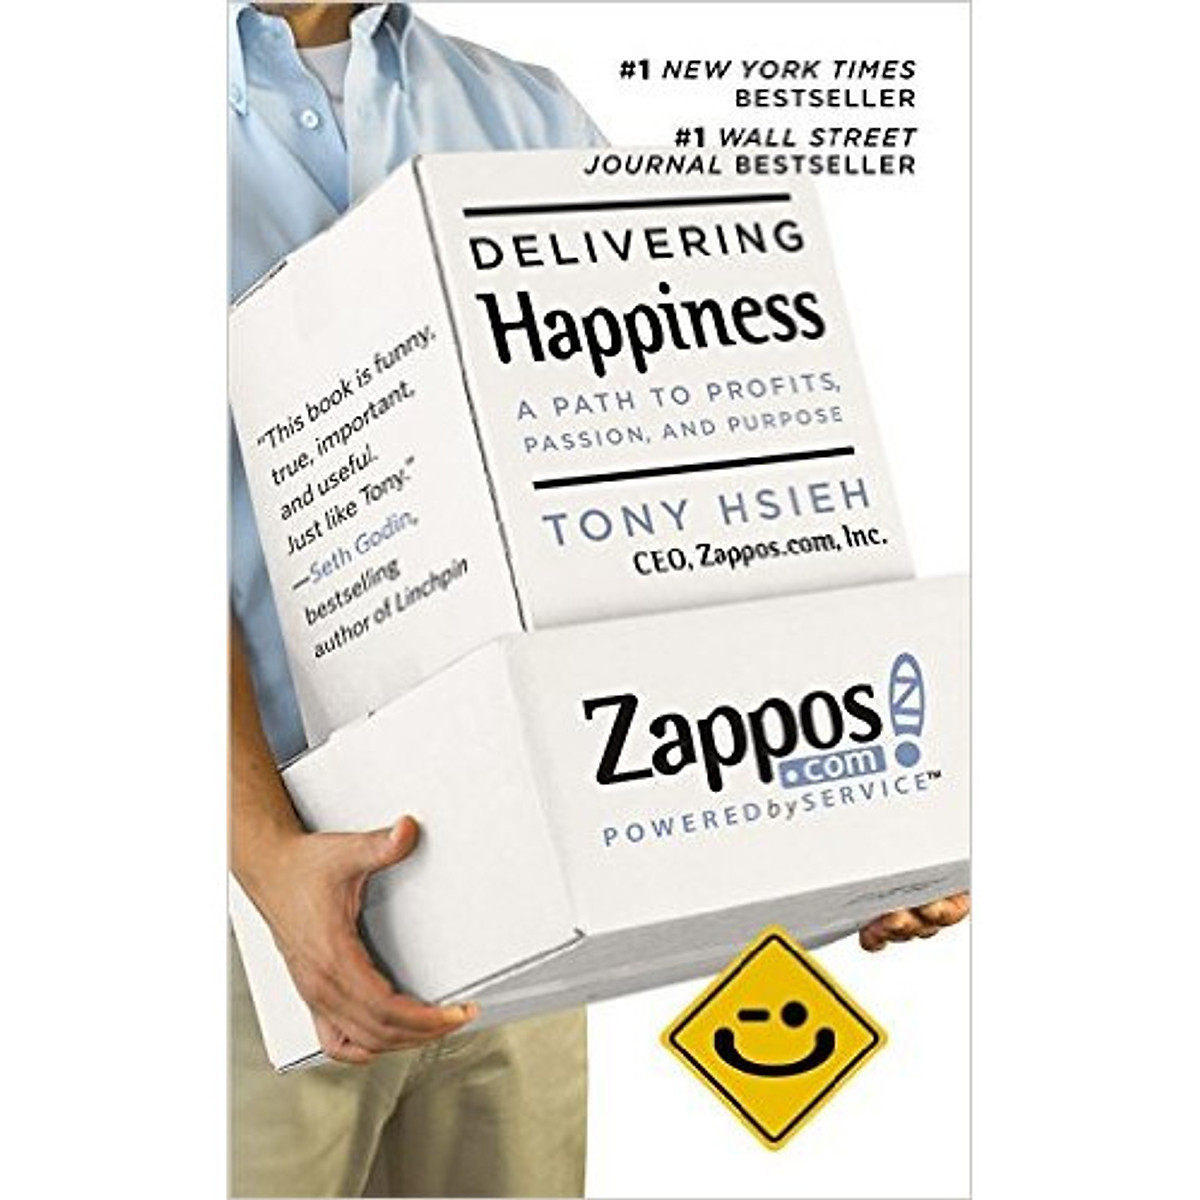 Delivering Happiness : A Path to Profits, Passion and Purpose (Mass Market Paperback)